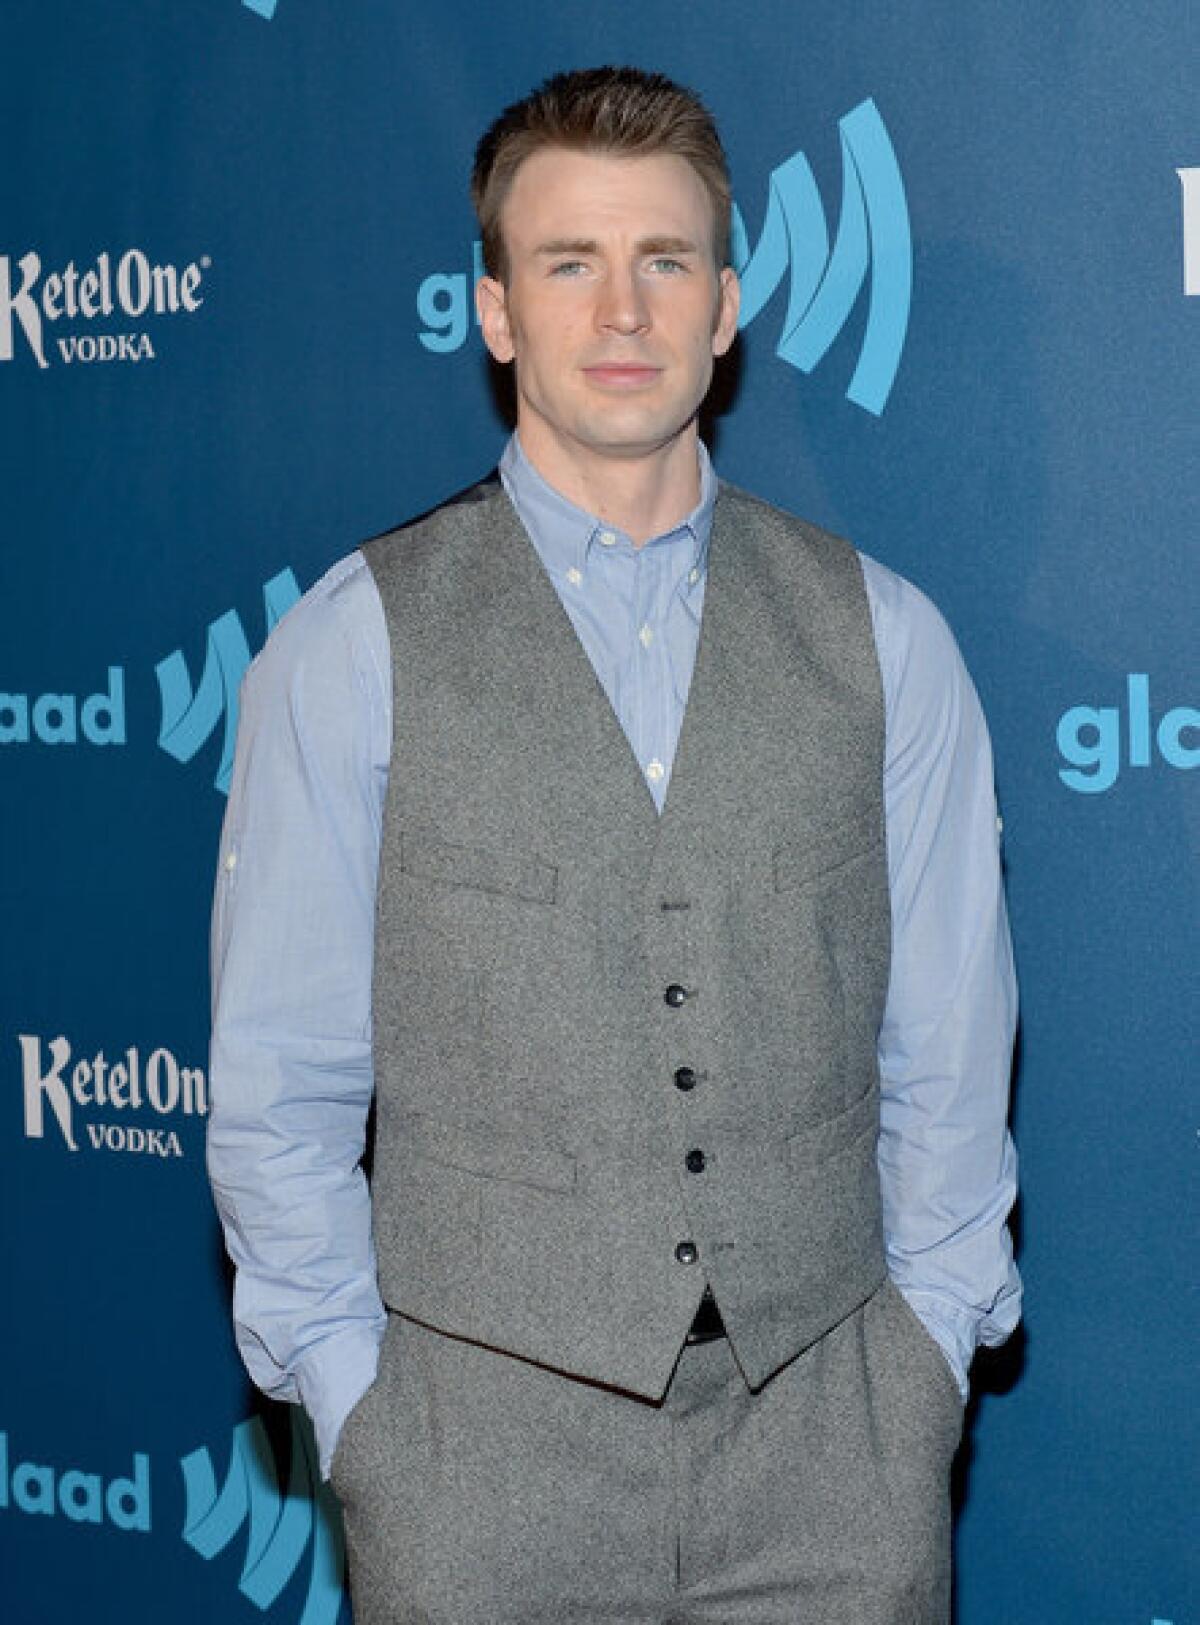 Actor Chris Evans at the 24th annual GLAAD Media Awards at L.A. Live.